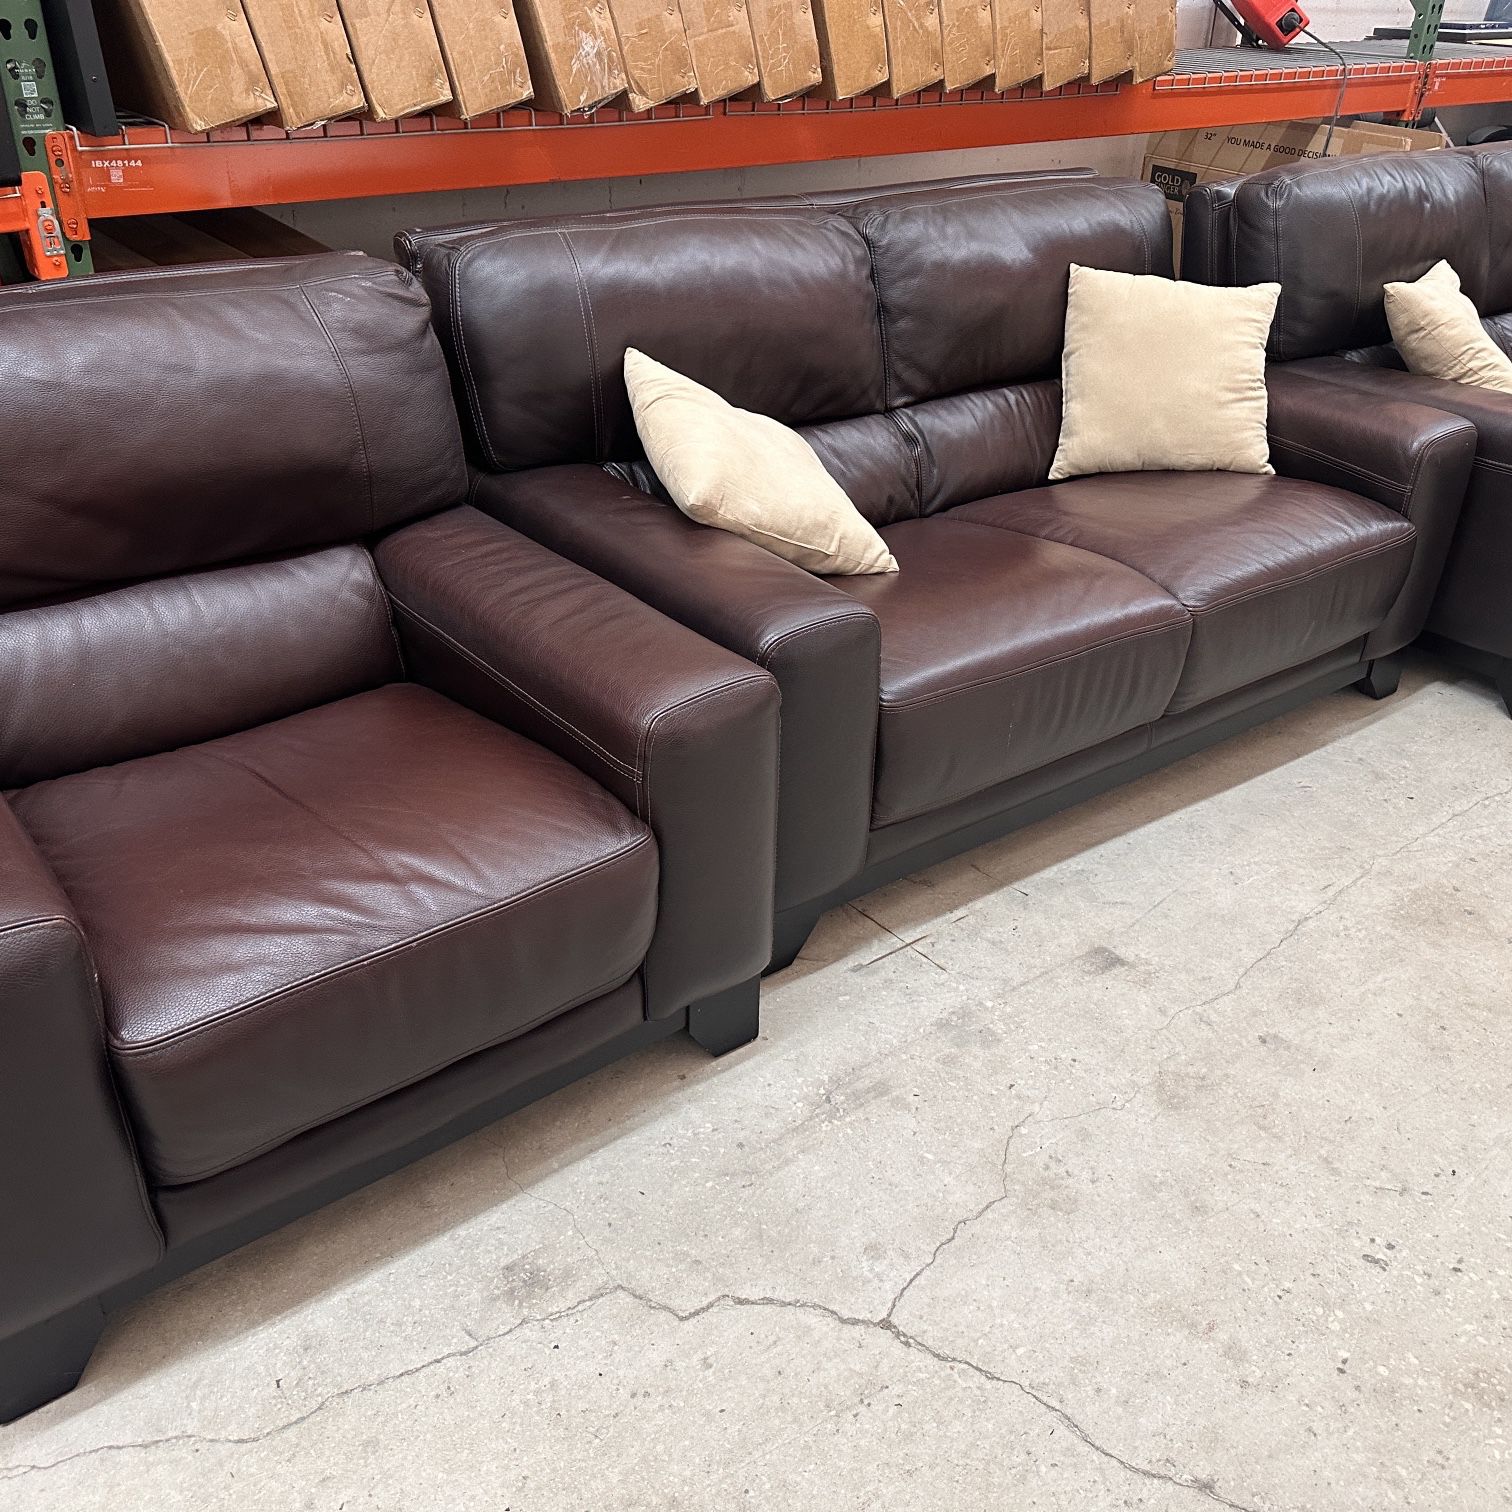 High End Leather Couches From Macy’s